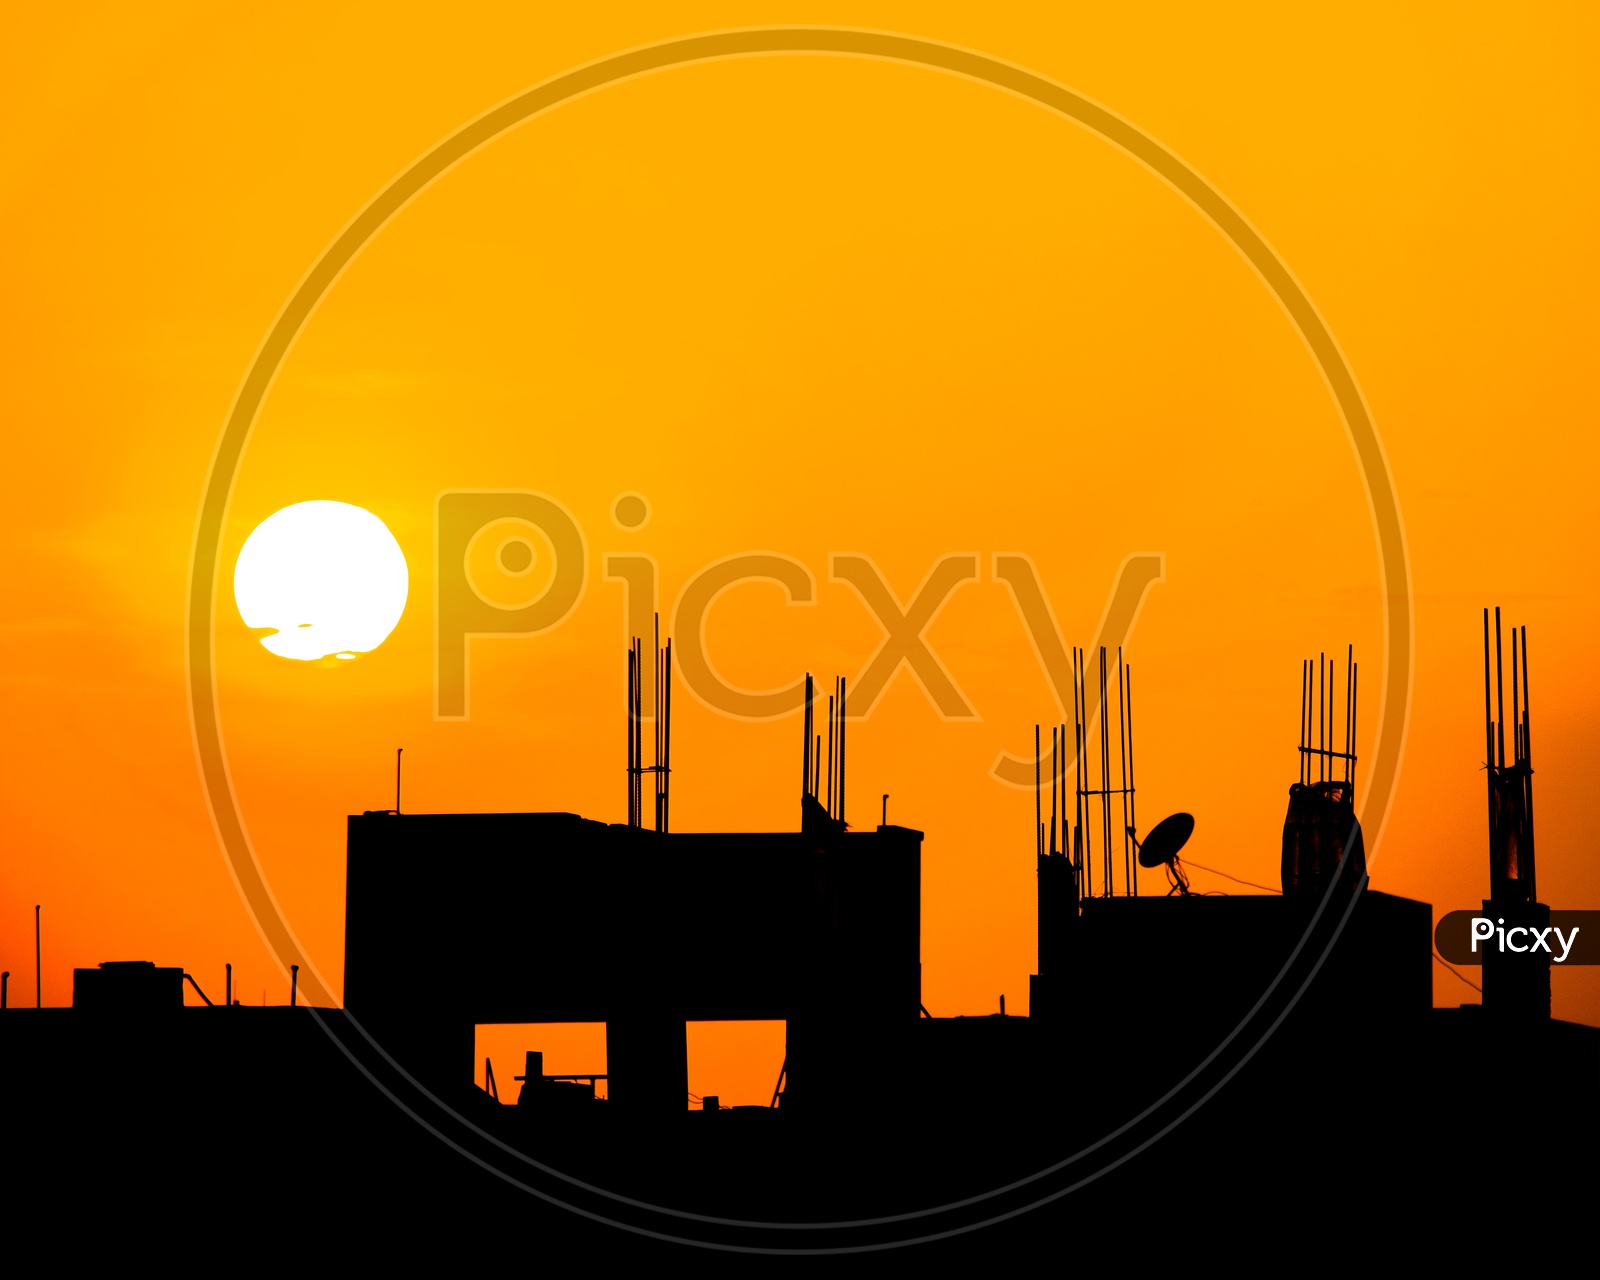 construction site silhouette with dish antenna